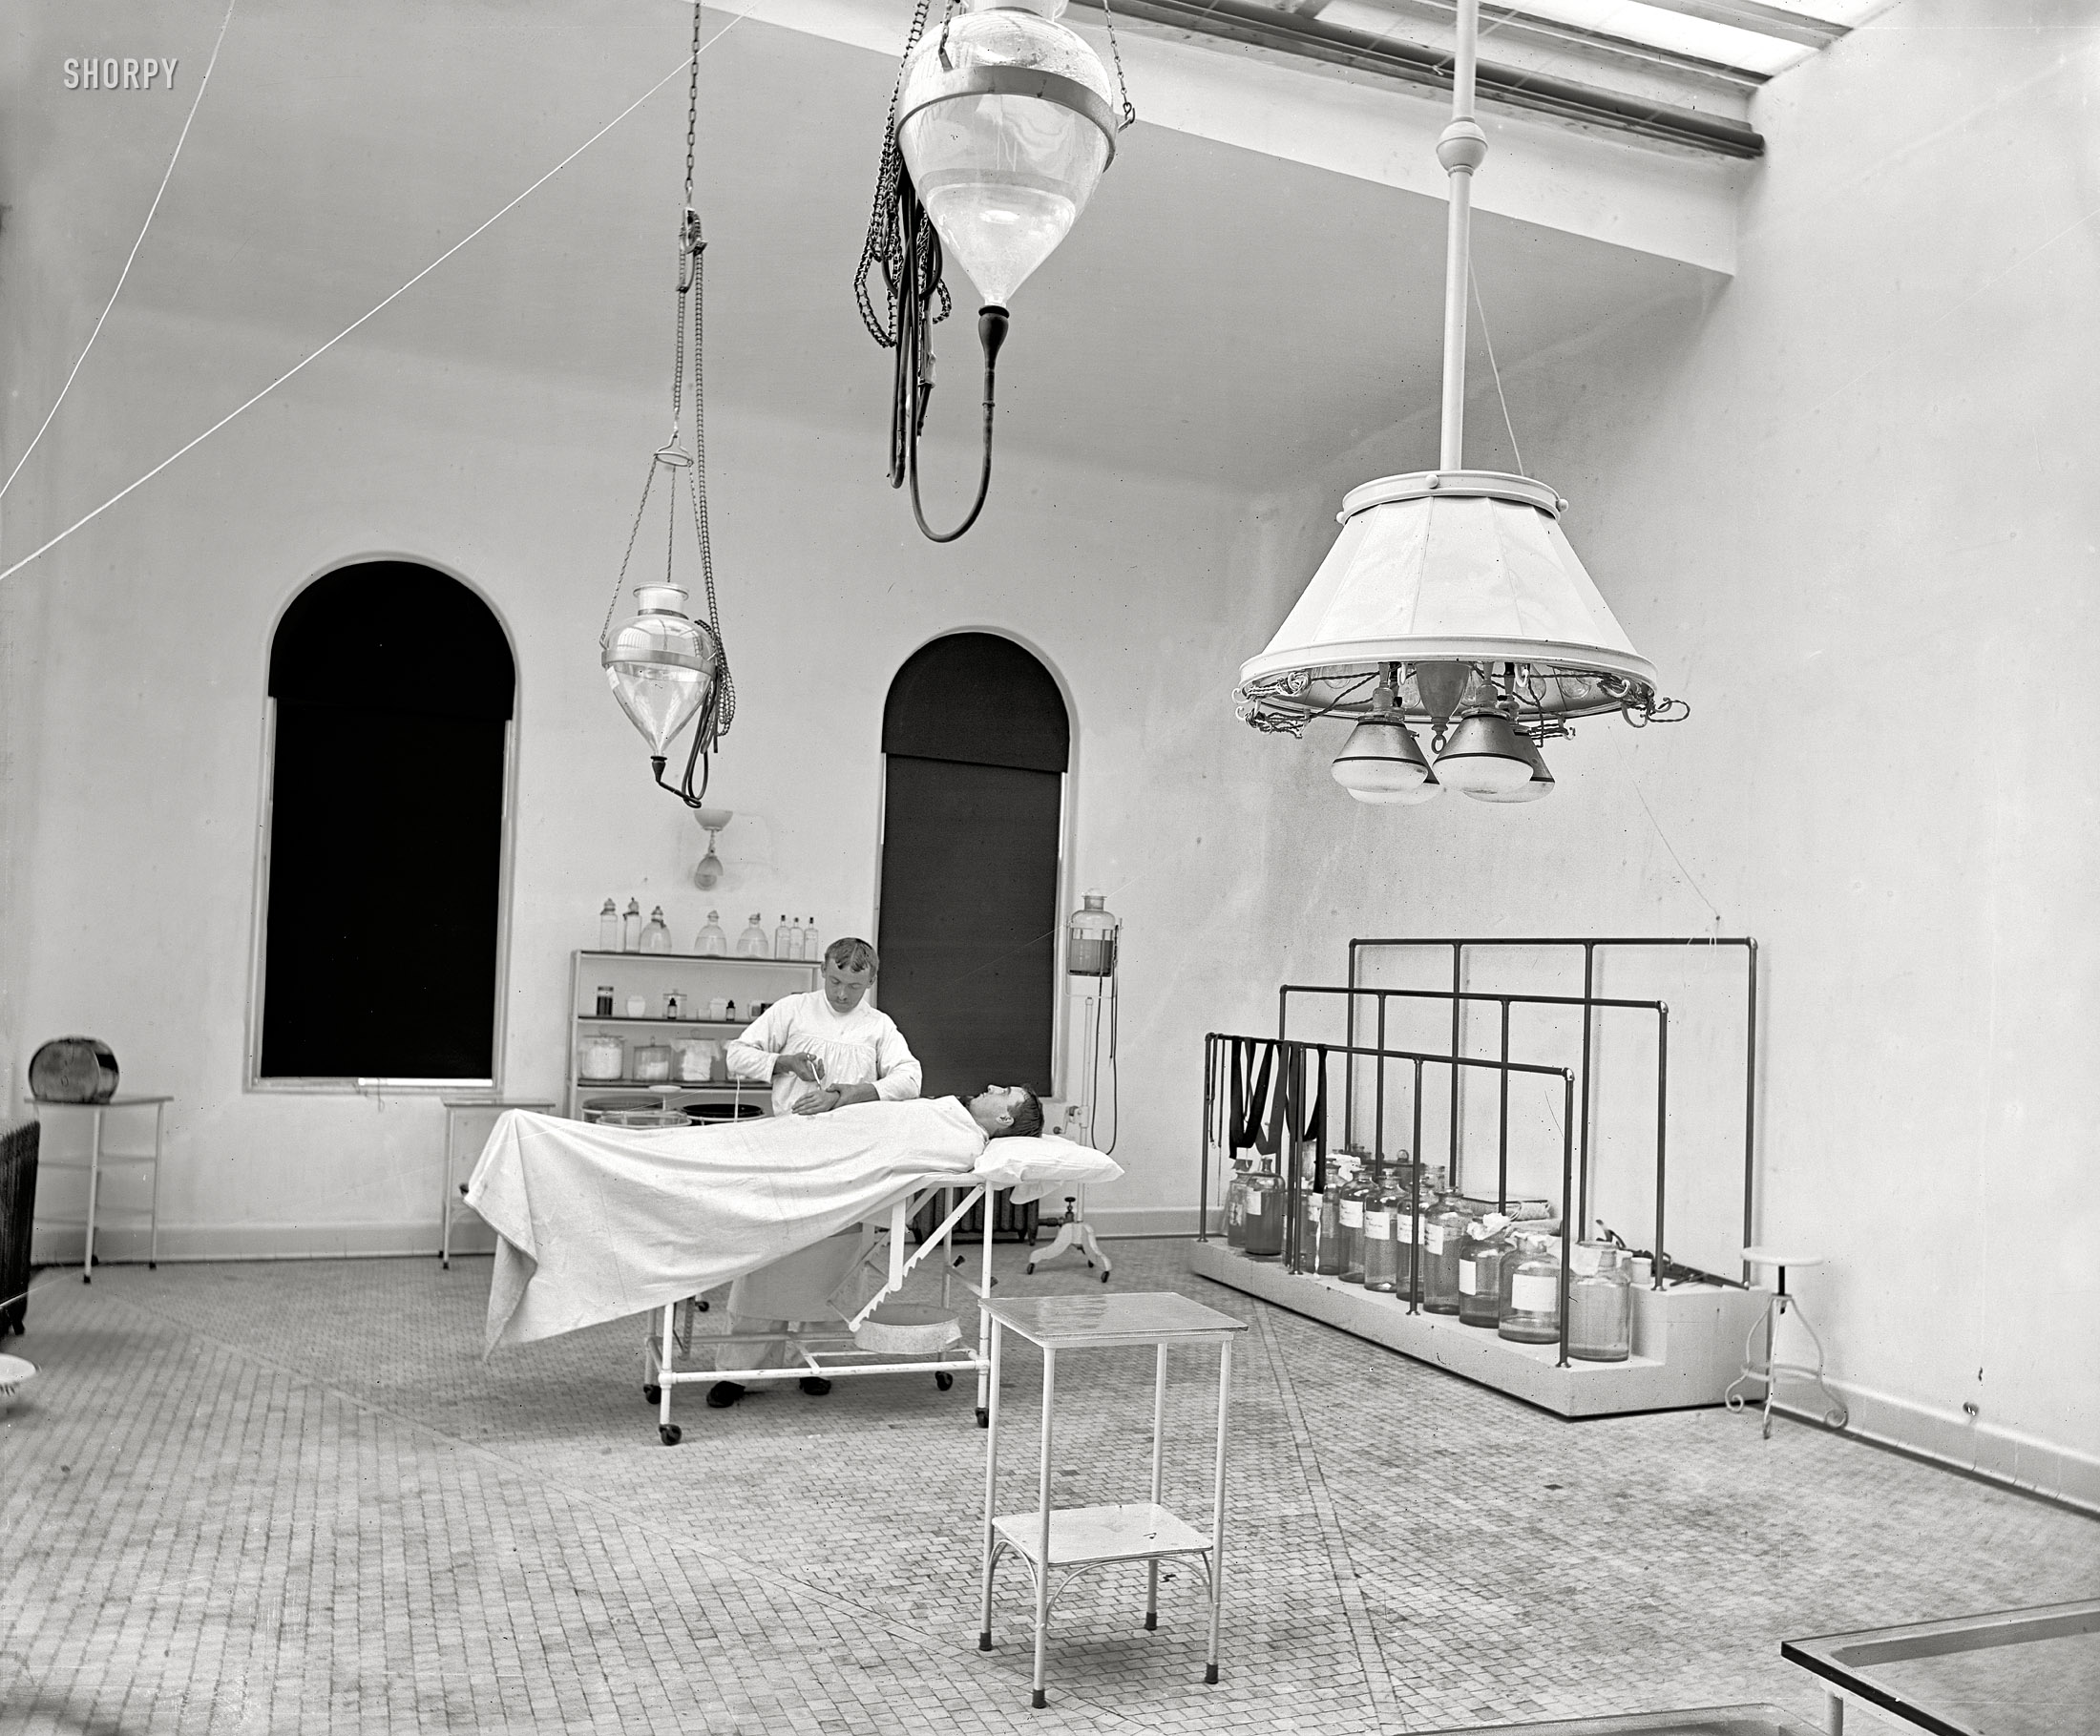 New York circa 1900. "Operating room in Brooklyn Navy Yard Hospital." 8x10 inch dry plate glass negative, Detroit Publishing Company. View full size.